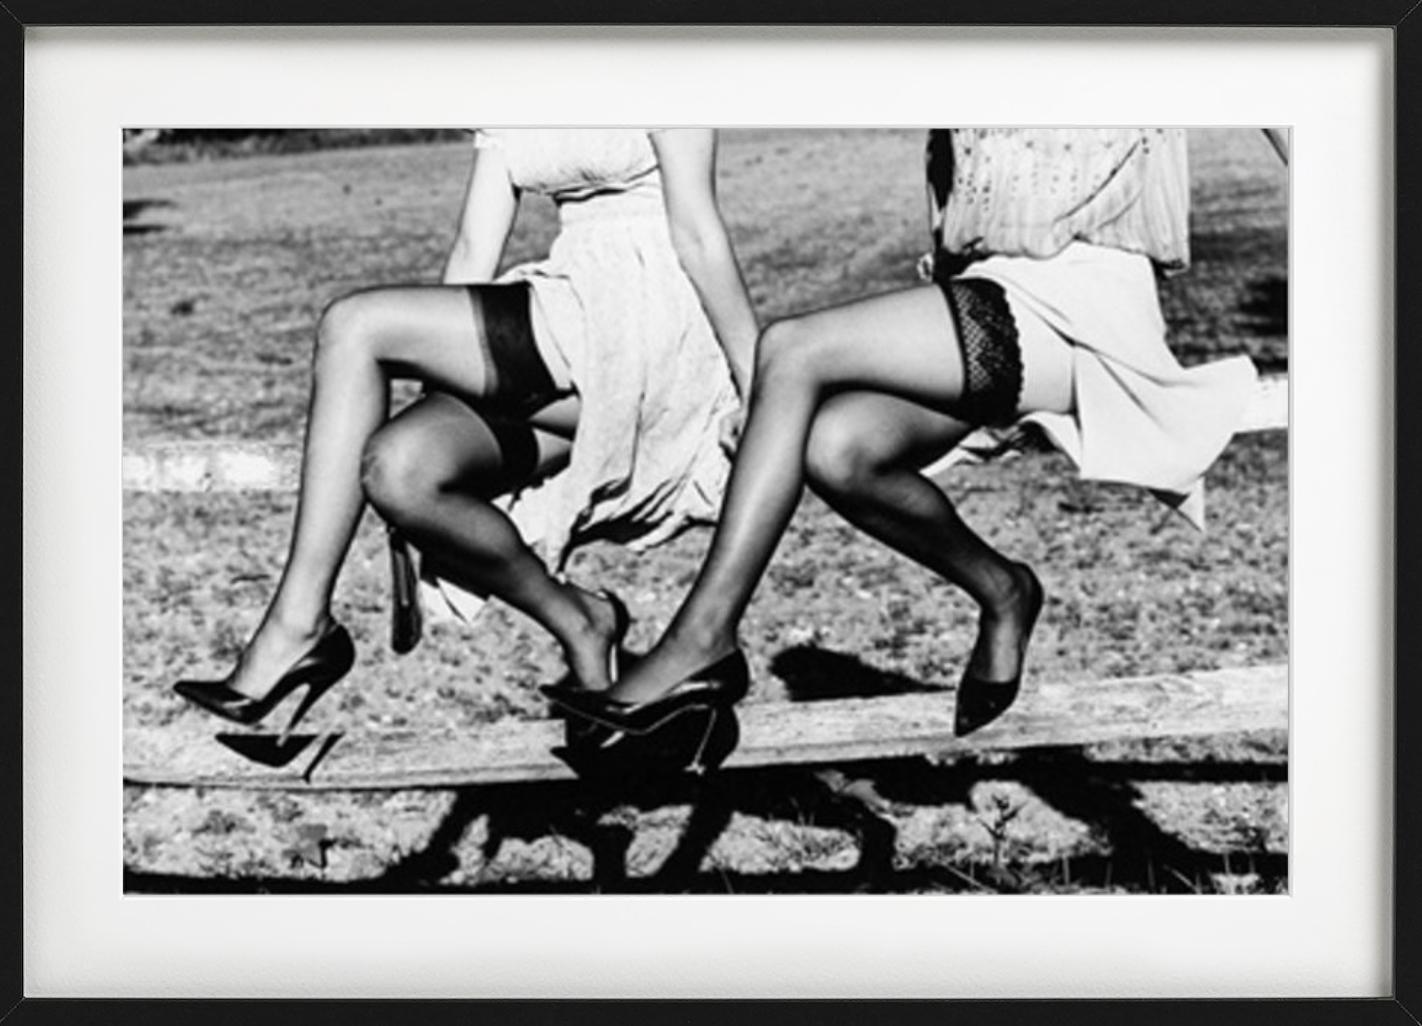 Leg Show II - Models in Stockings sitting on a fence, fine art photography, 2002 - Photograph by Ellen von Unwerth